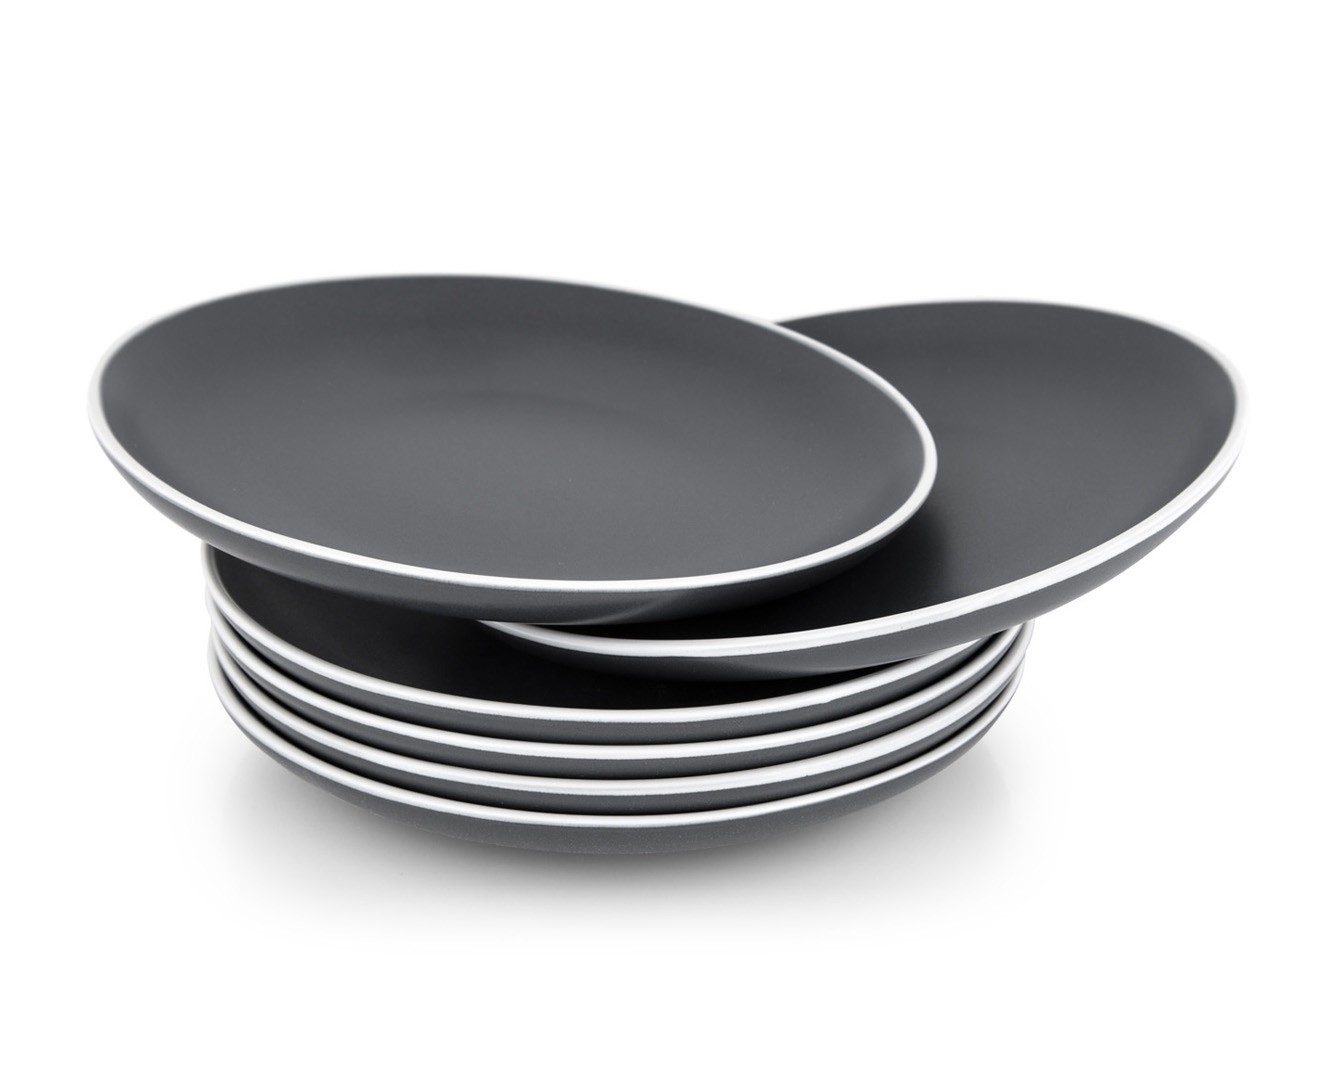 Cooper & Co. Pasco 20cm Side Plate 6-Pack - Charcoal